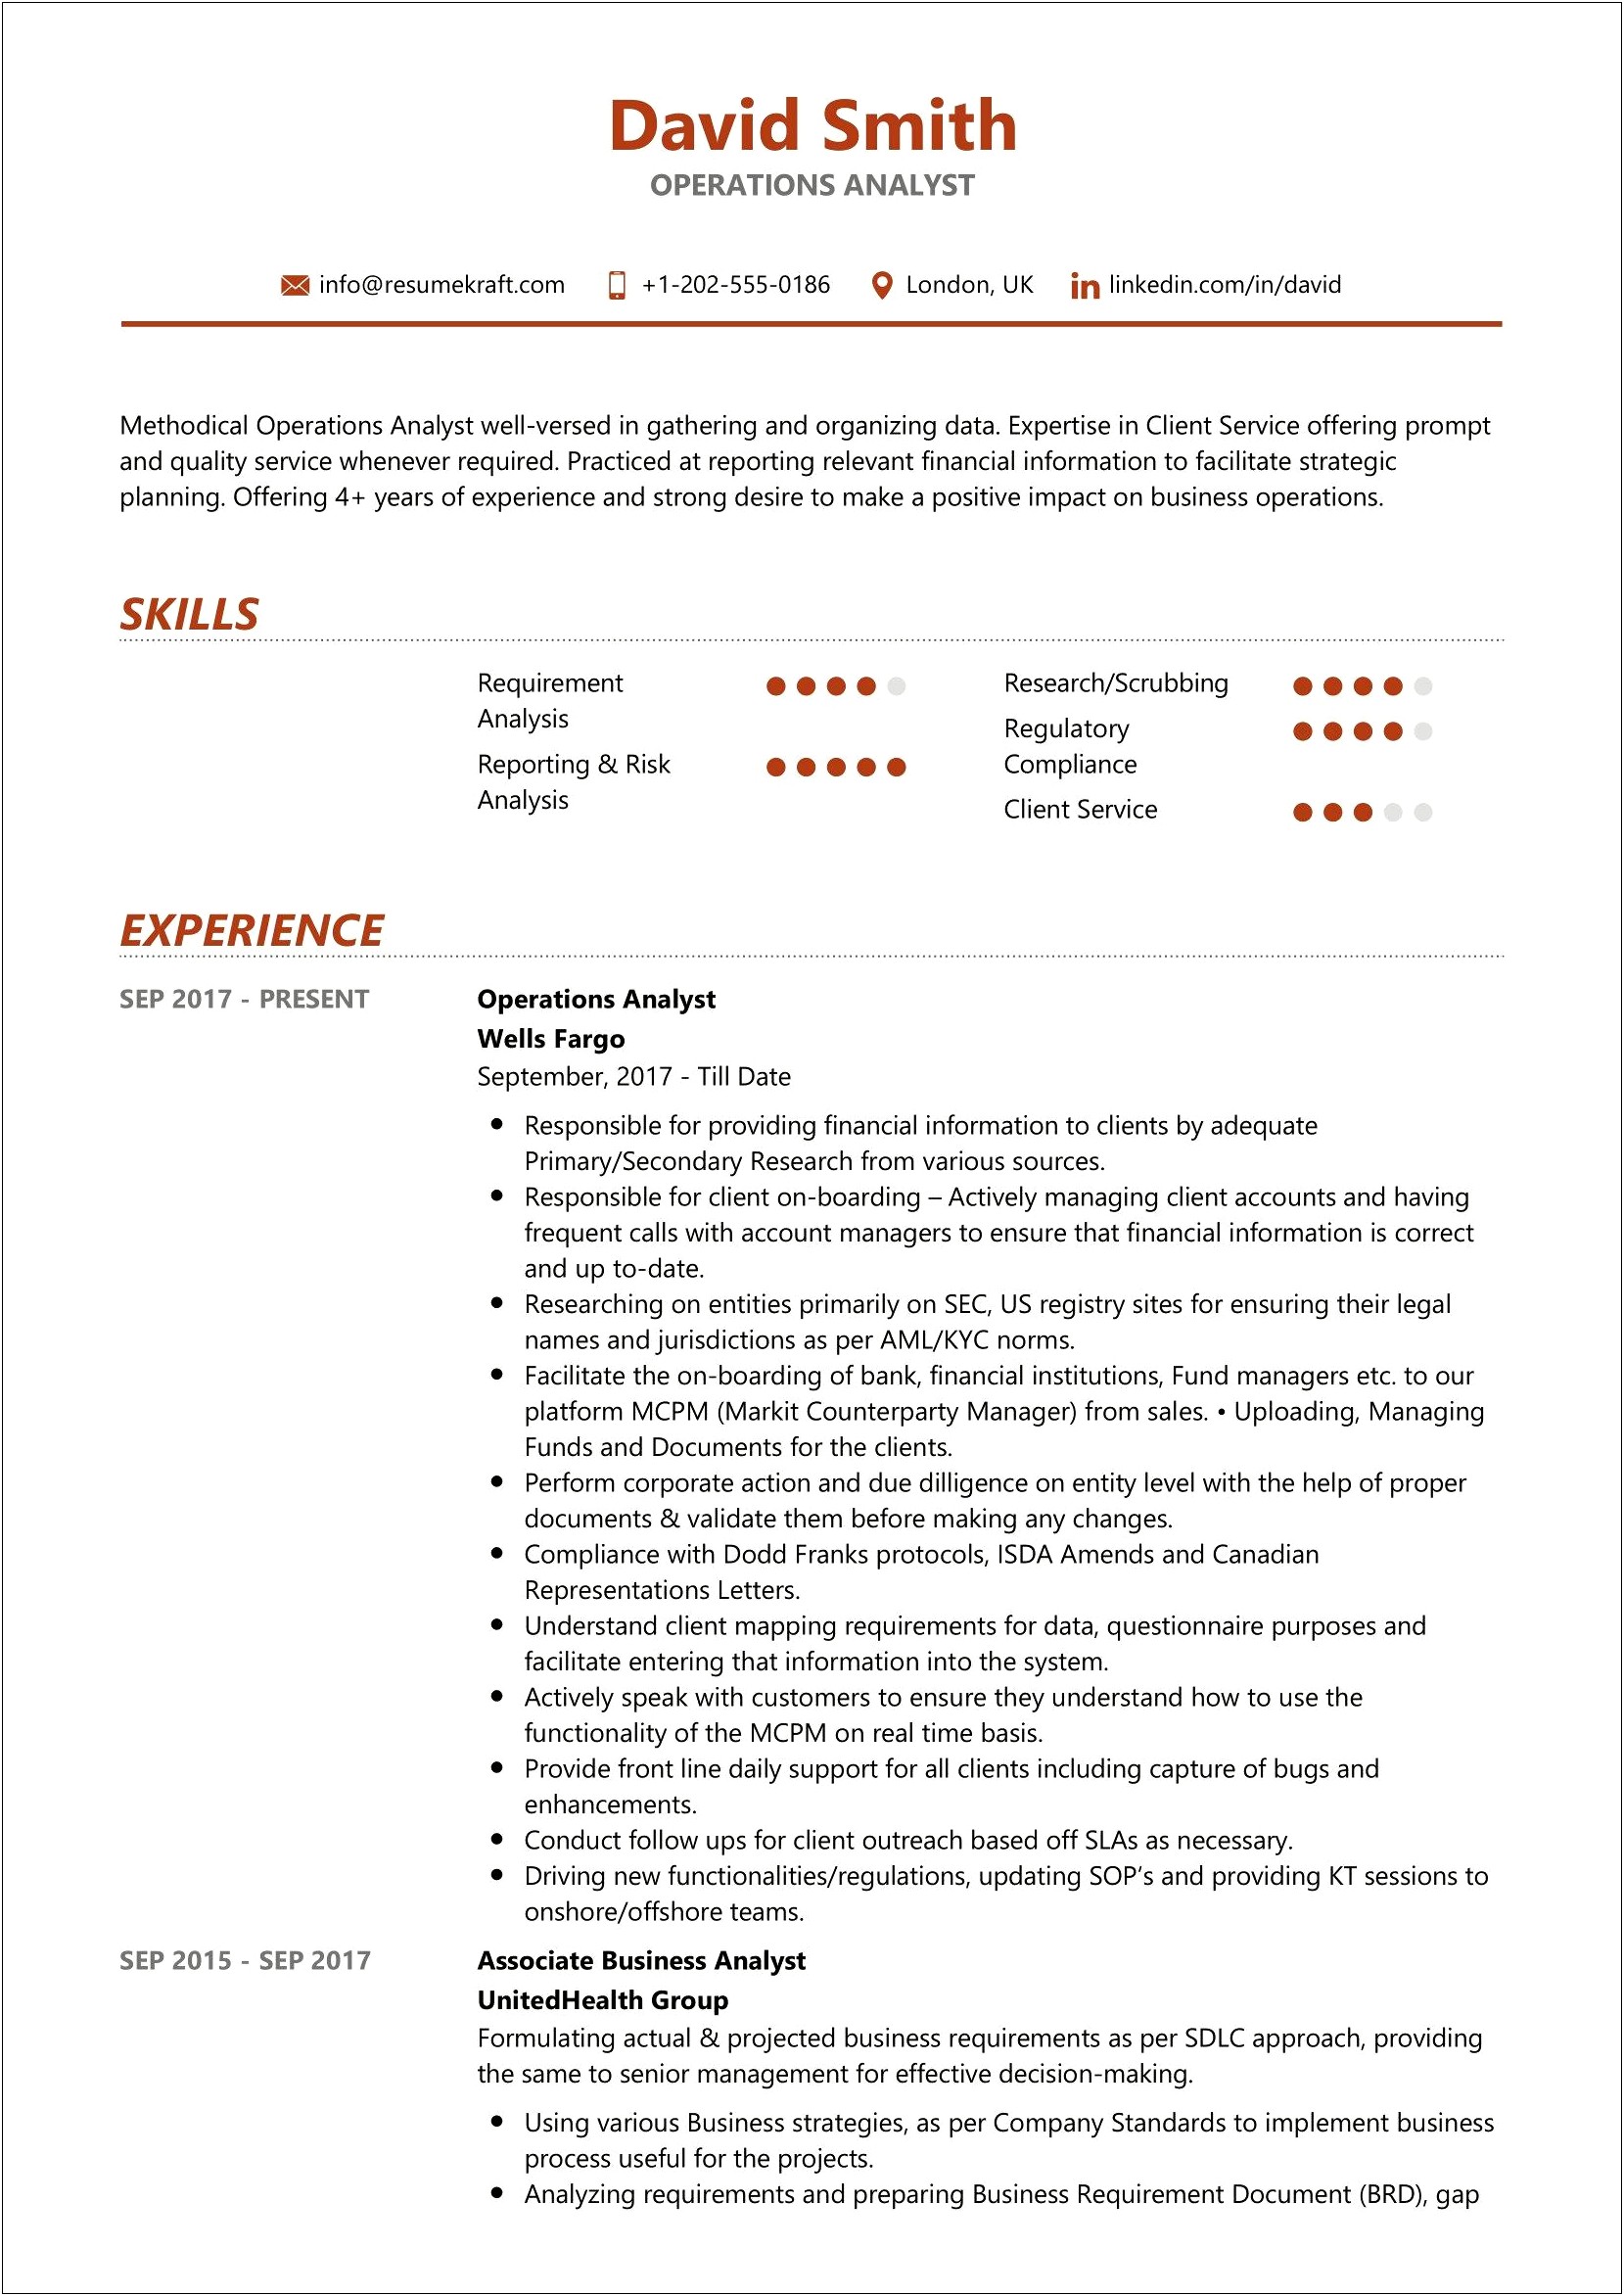 Call Center Quality Analyst Resume Sample